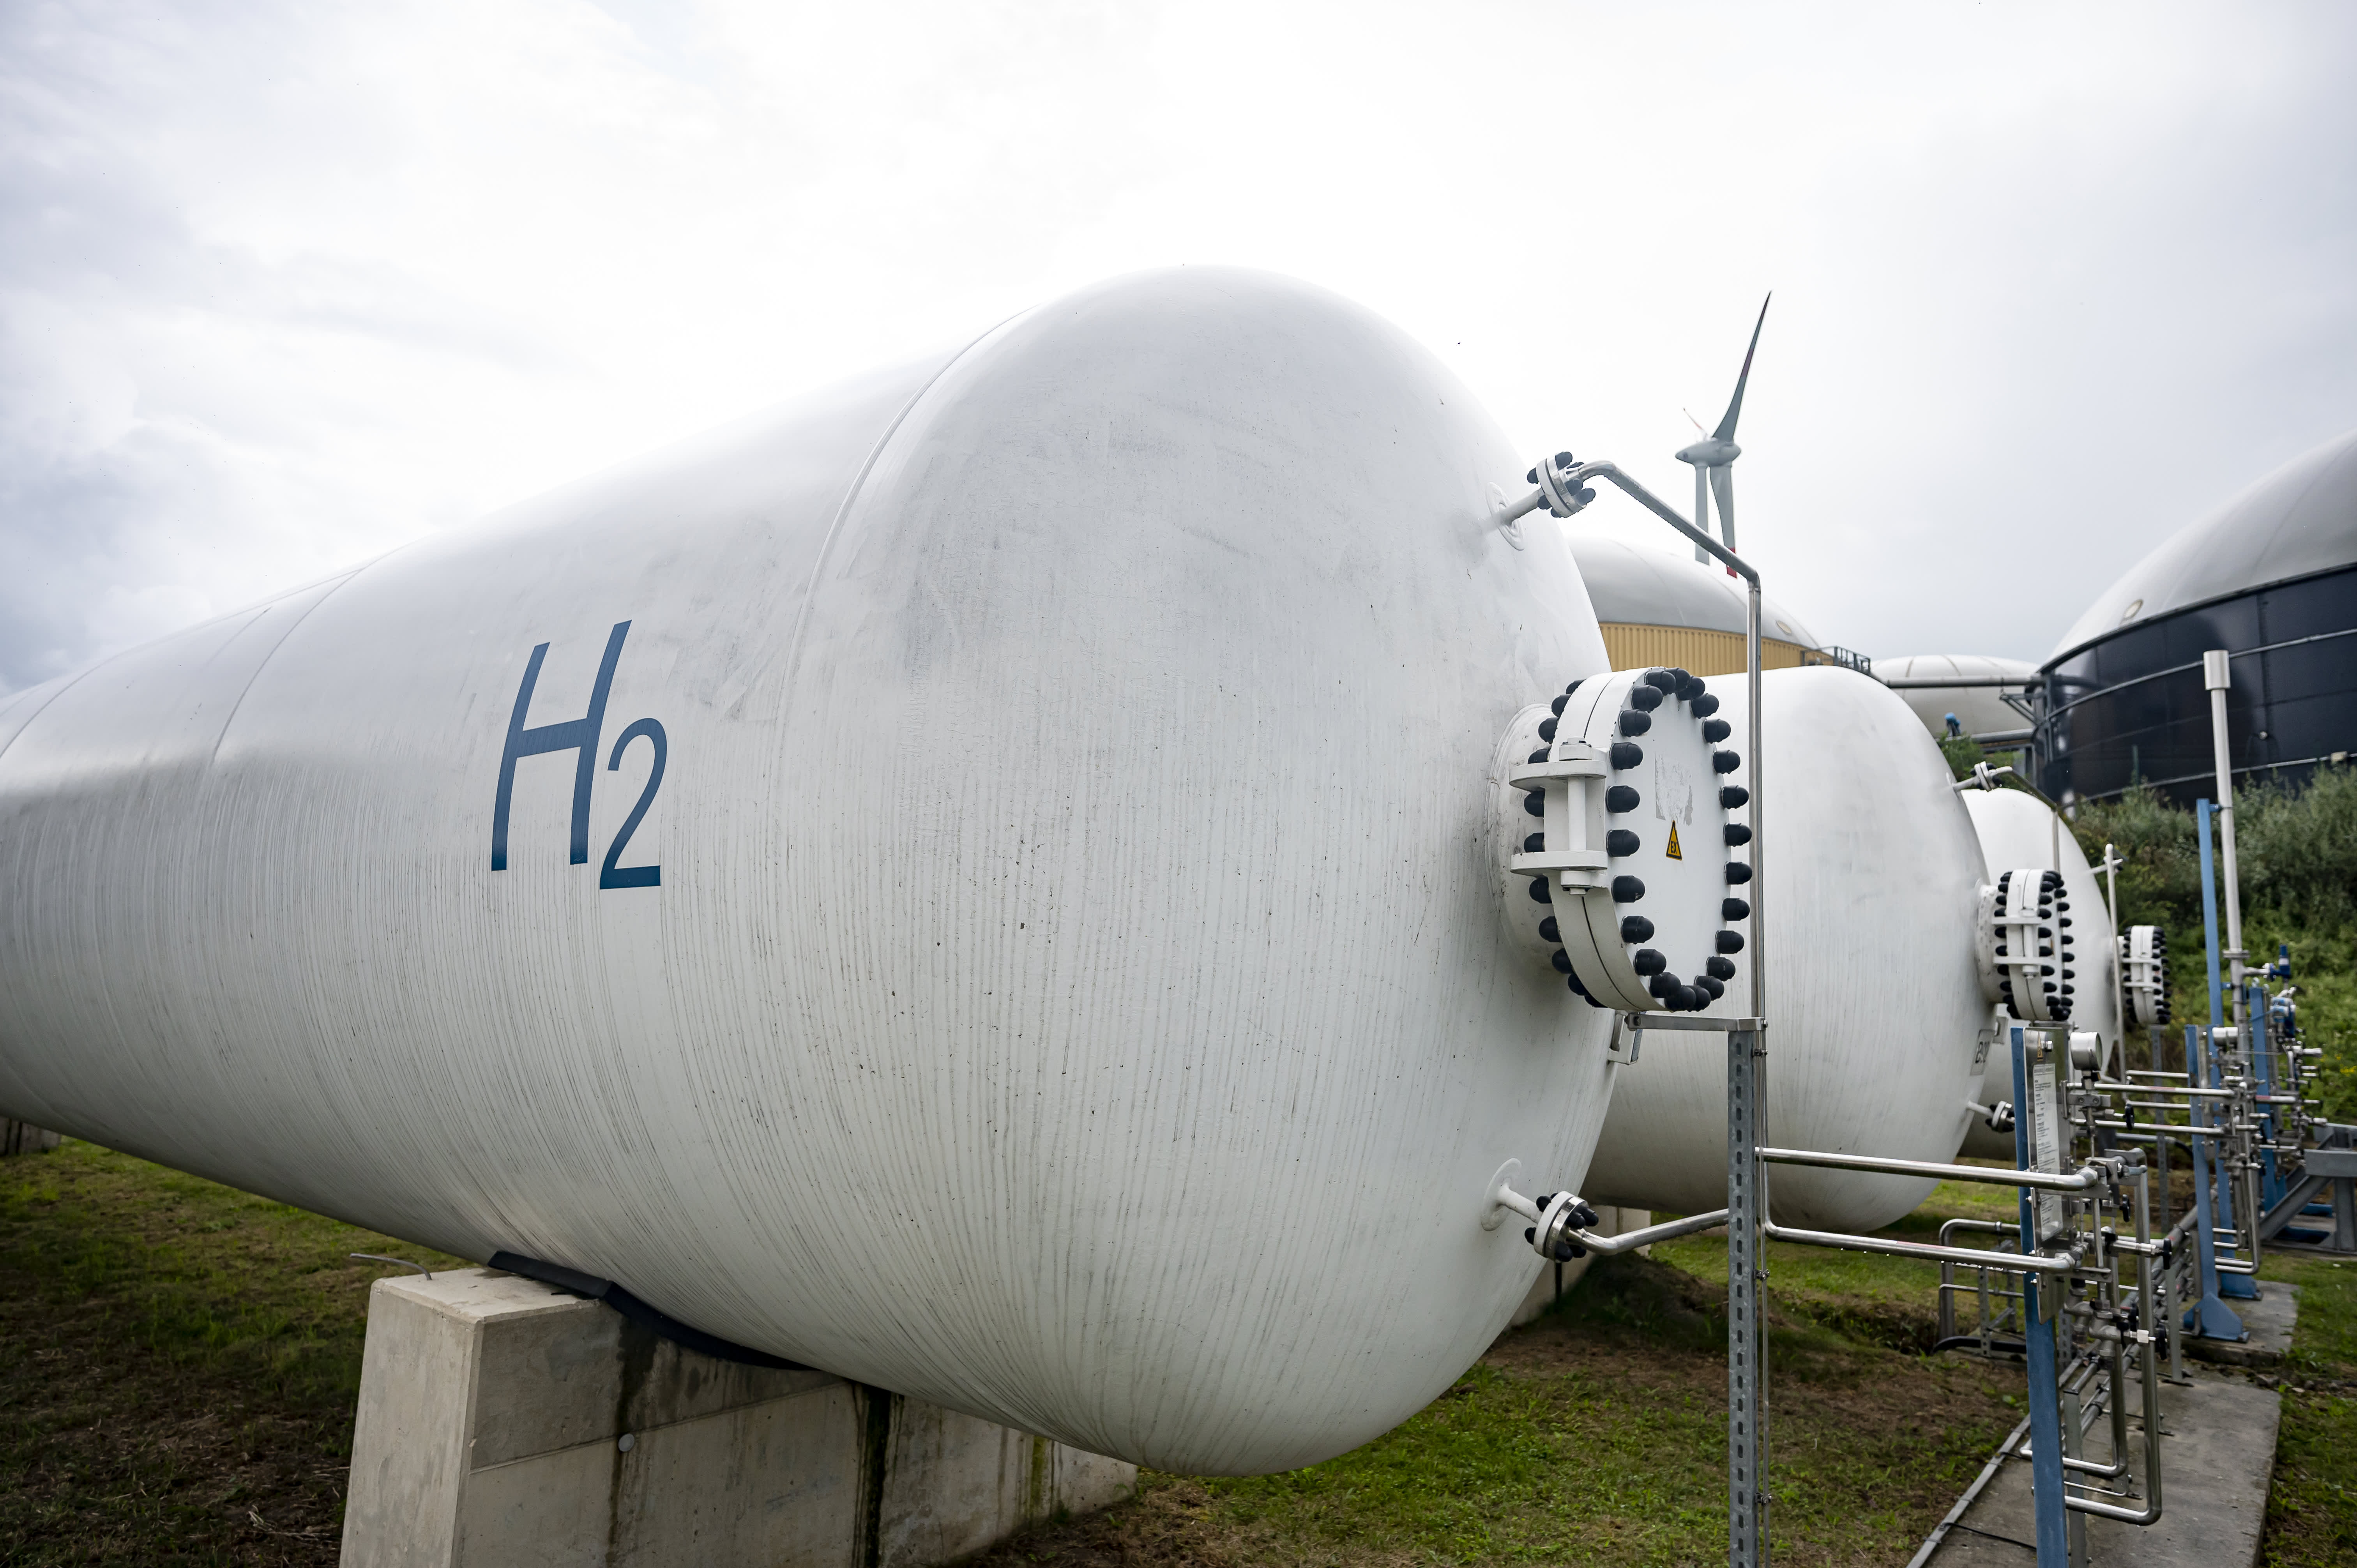 Hydrogen power is gaining momentum, but critics say it's neither efficient nor green enough